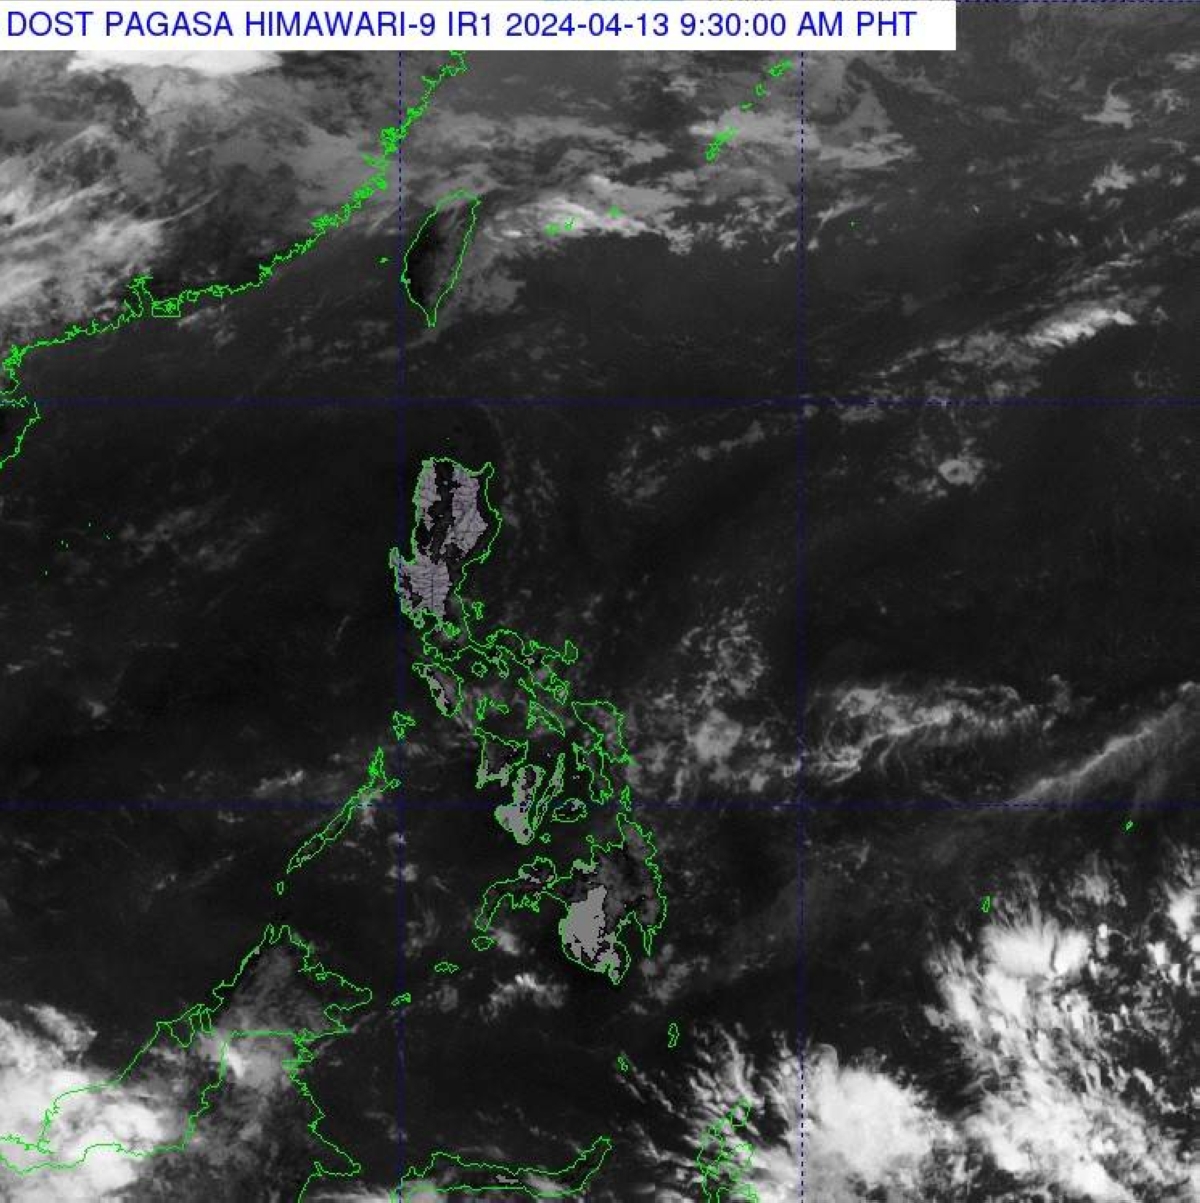 easterlies continue to affect ph—pagasa